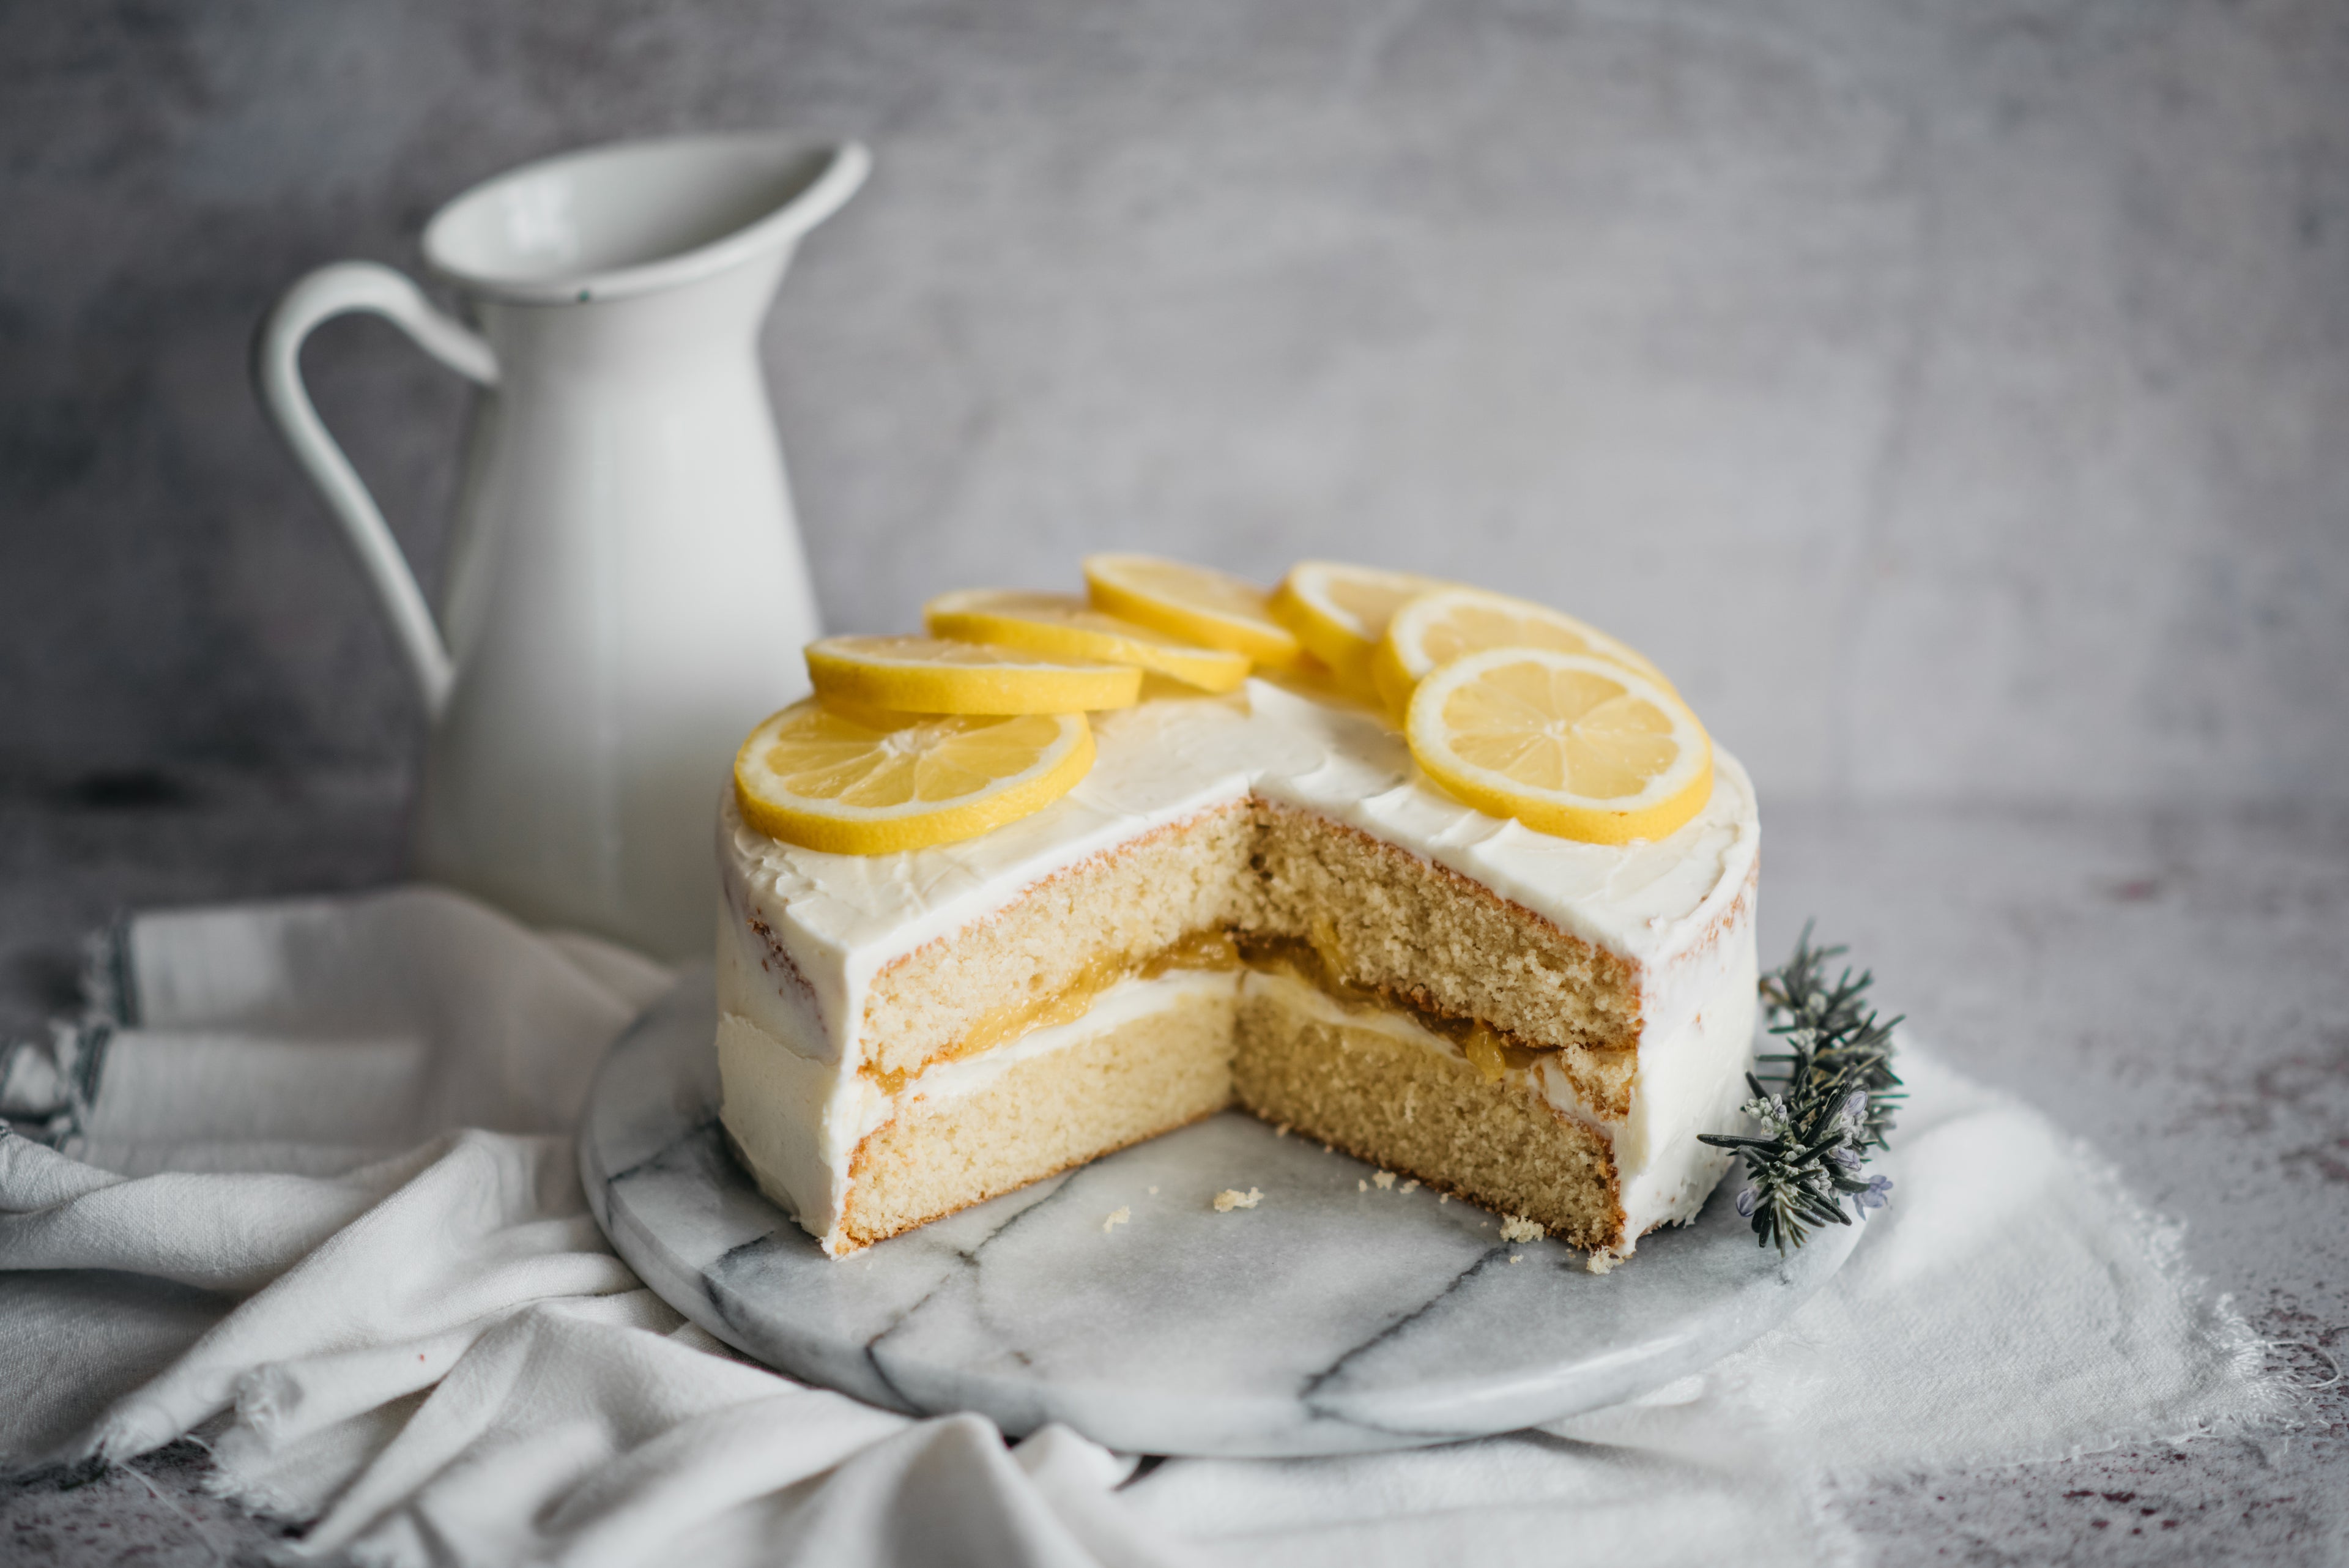 Gluten Free Elderflower & Lemon Cake with a slice cut out of it showing the lemon filled layers. Topped with slices of lemon